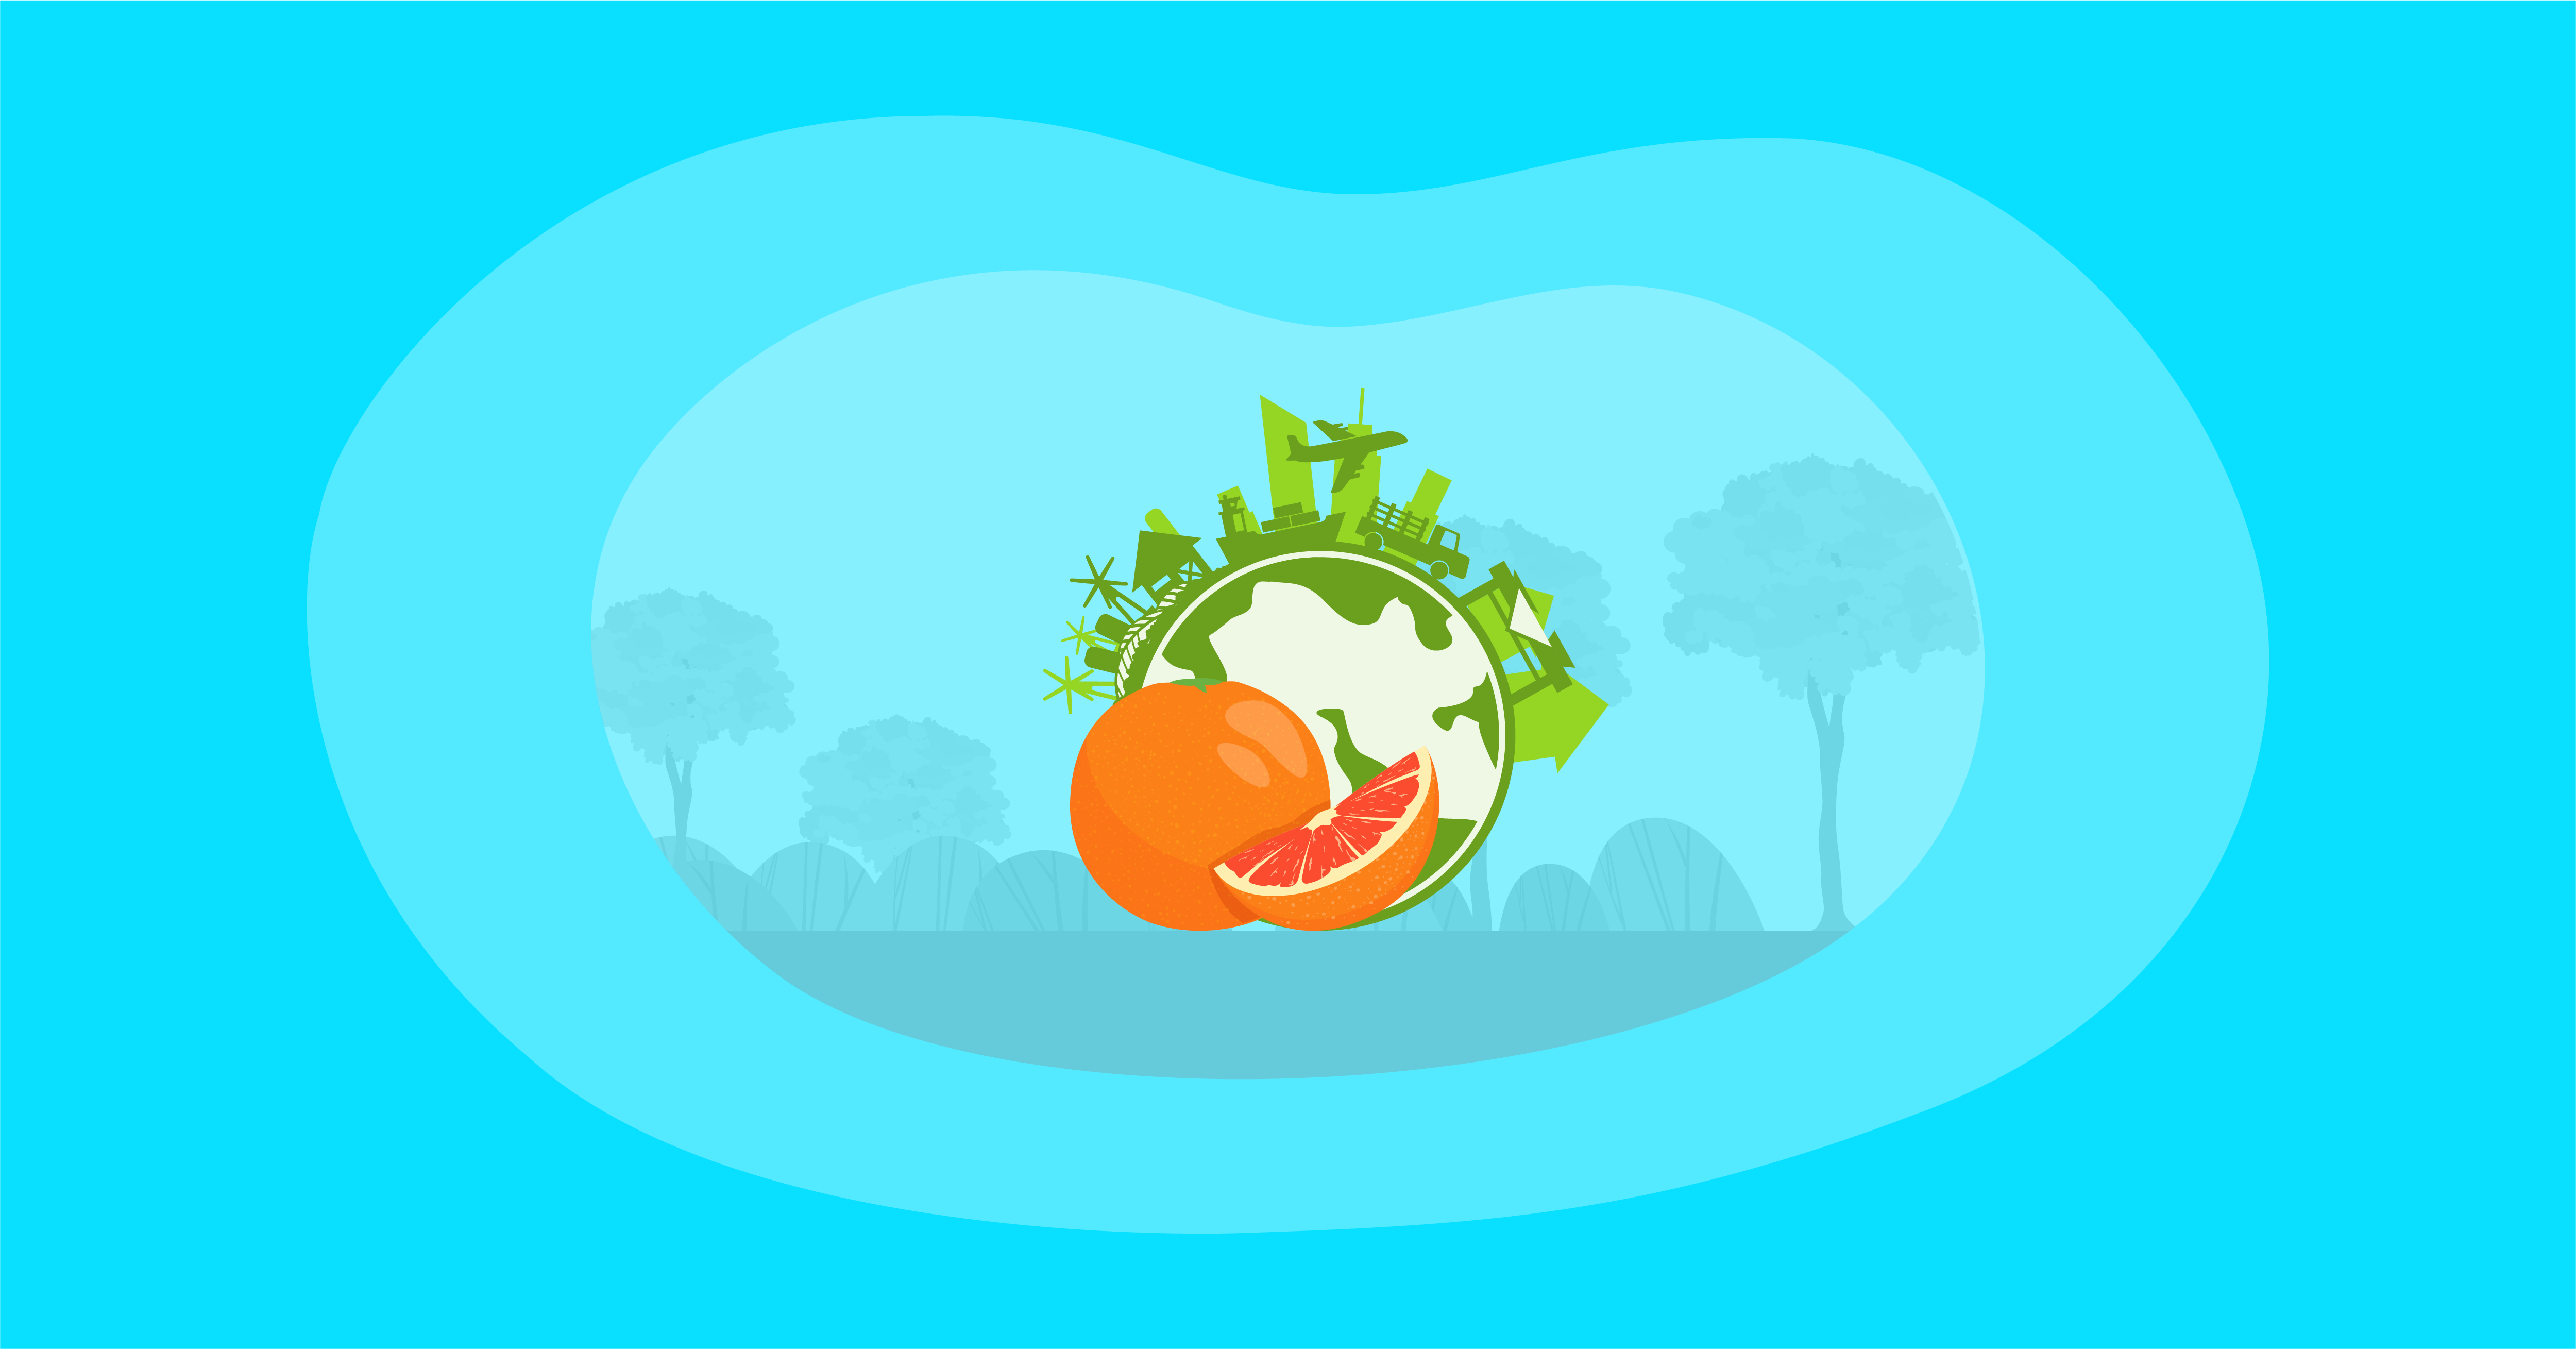 Illustration of grapefruits and their environmental impact